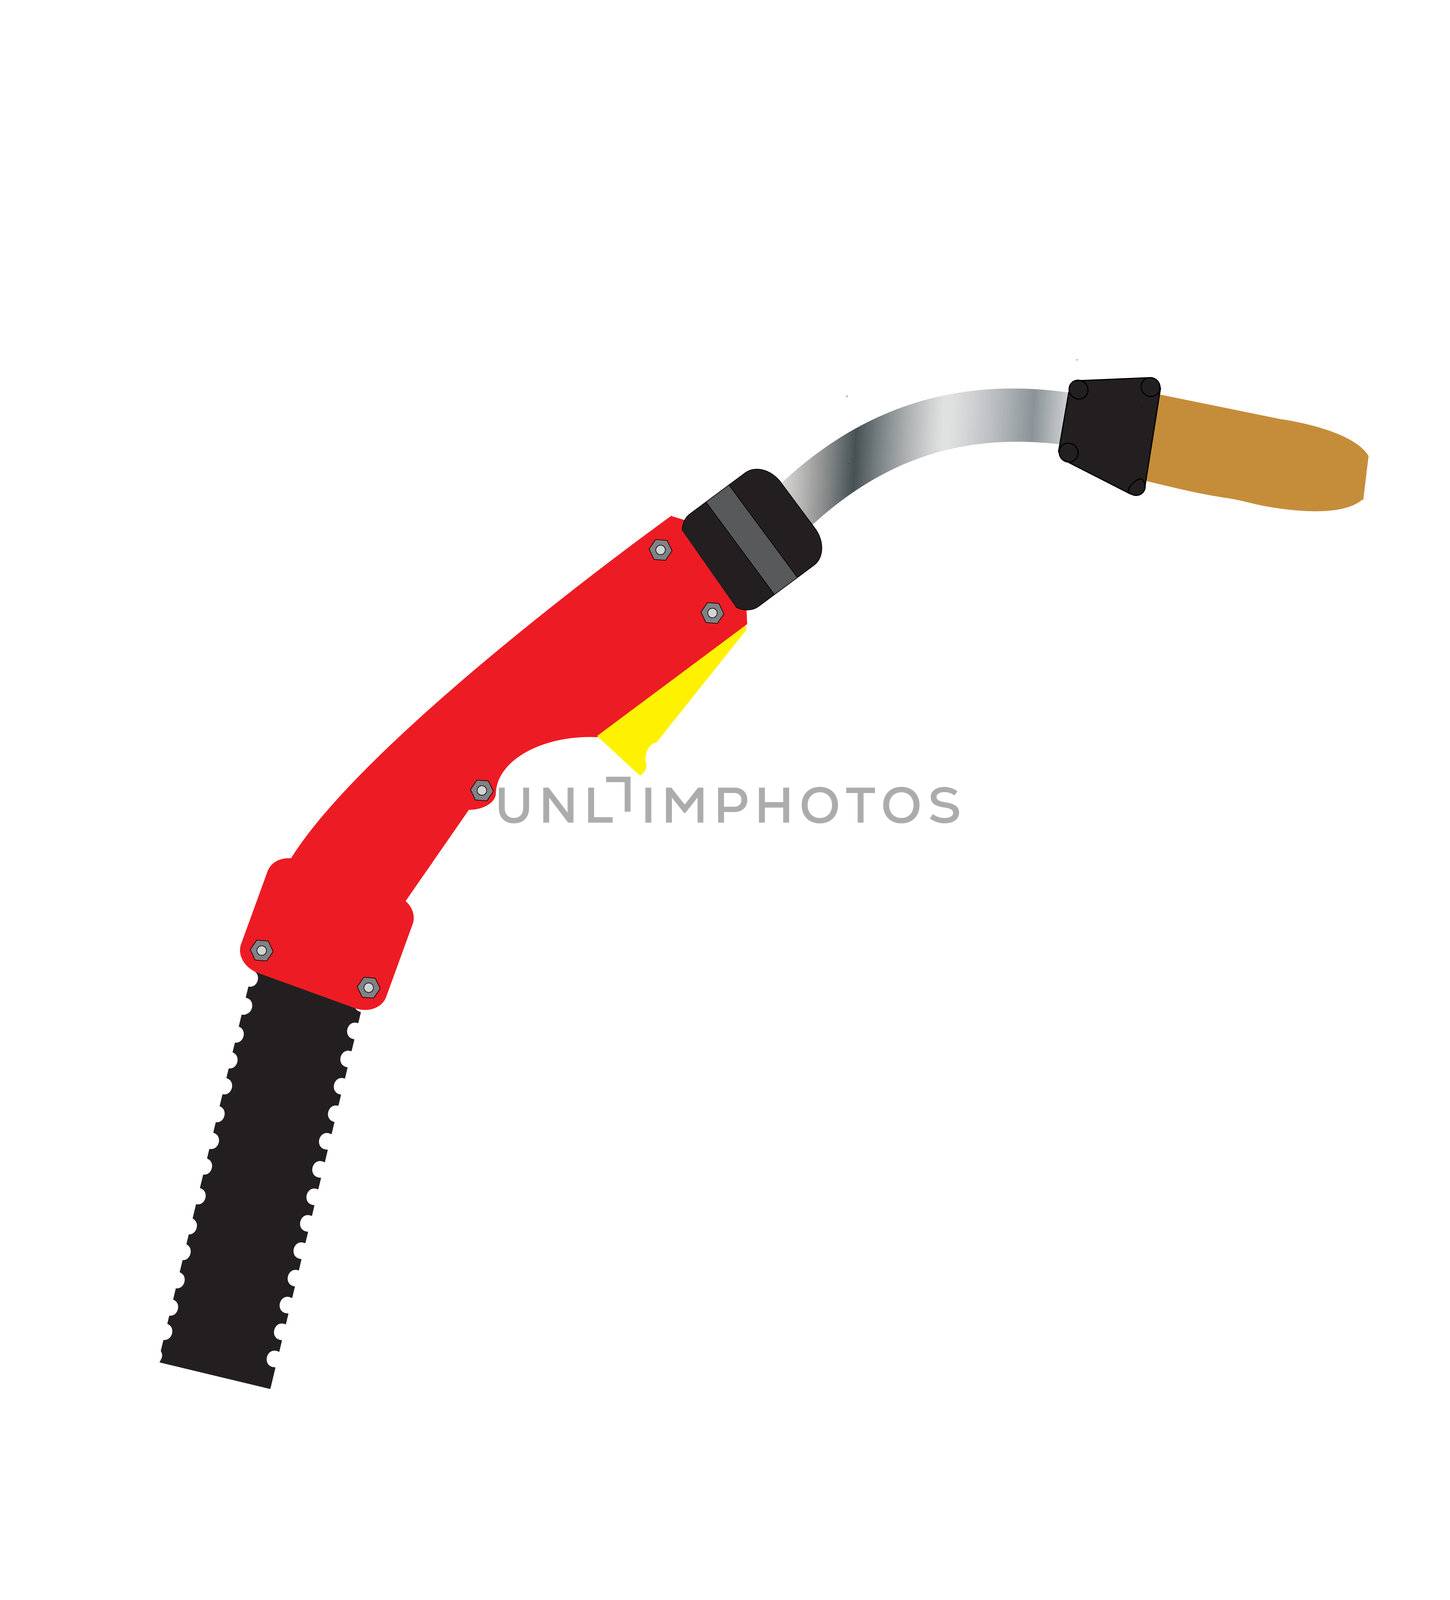 A Red and Yellow Mig Welding Torch isolated on White